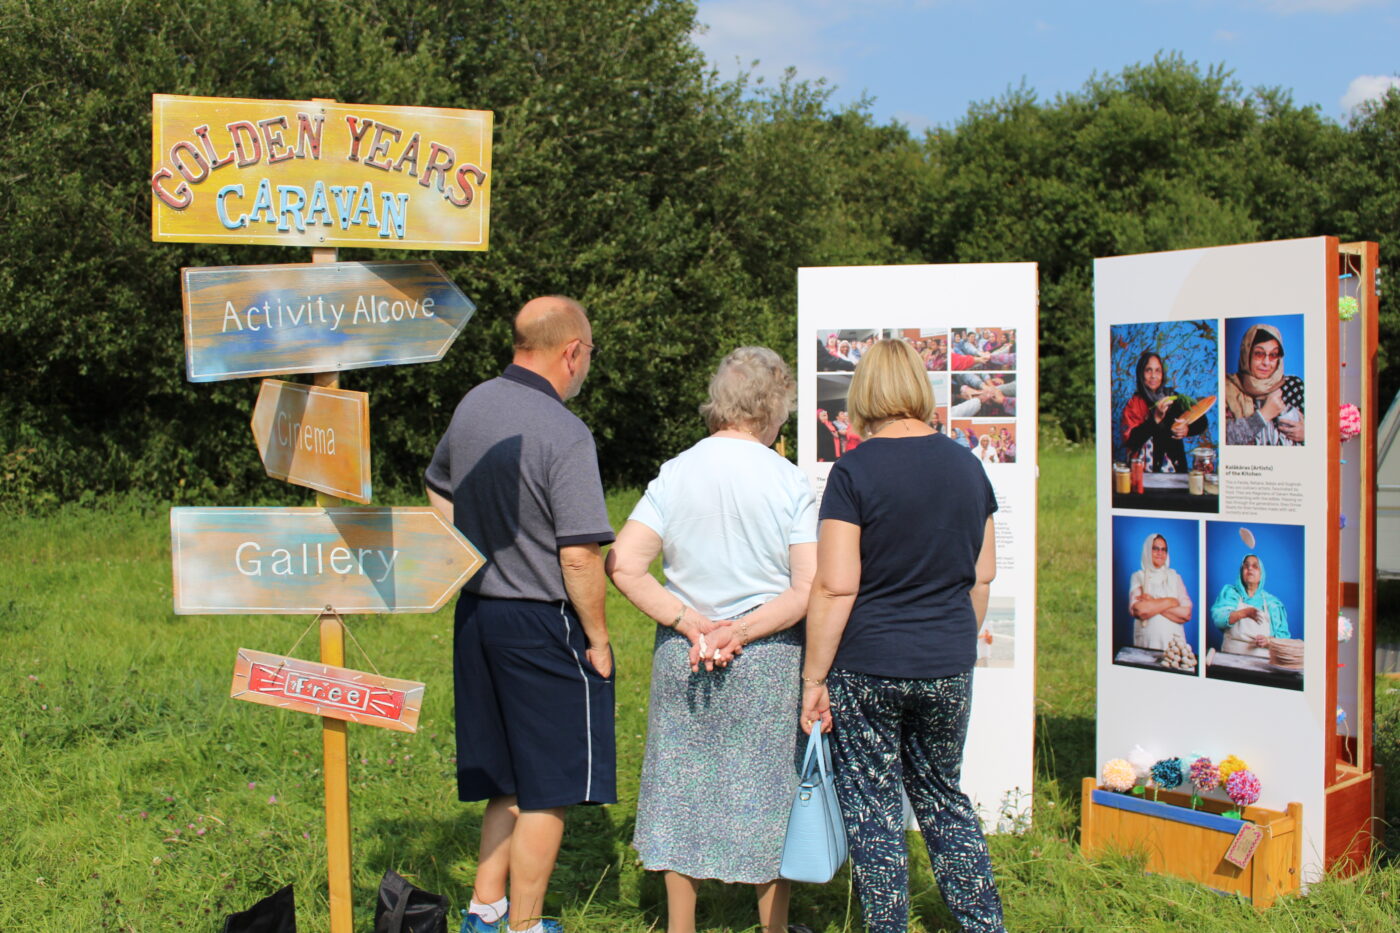 Three people stand in the sunshine looking at a display board of photography. Behind them, a sign post for Golden Years Caravan points the way to areas including Activity Alcove and Gallery.